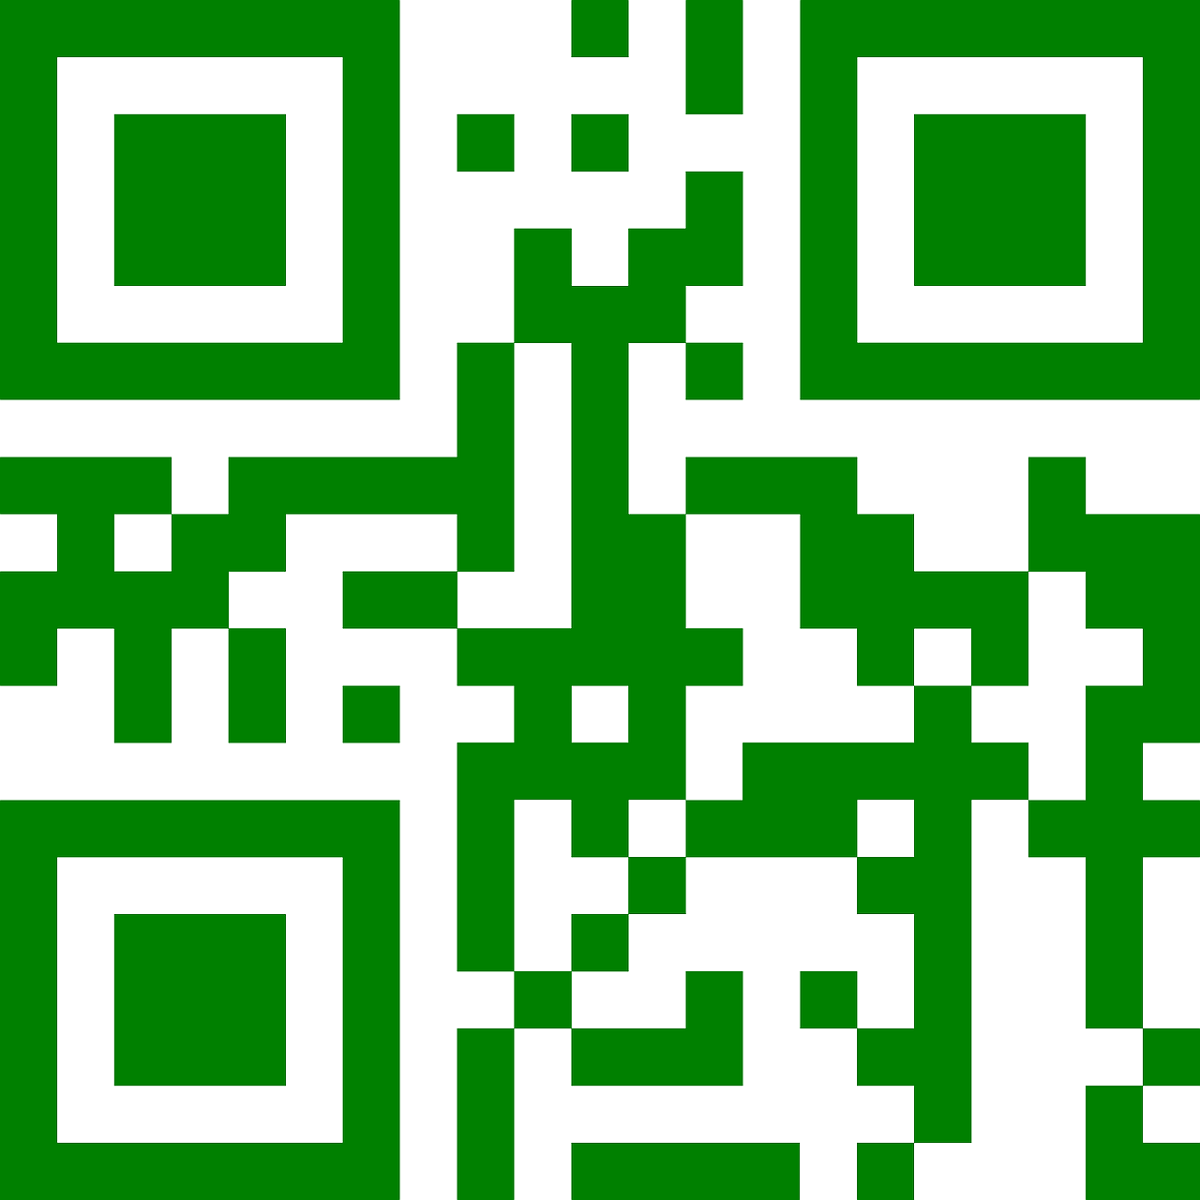 image to qr code converter online free